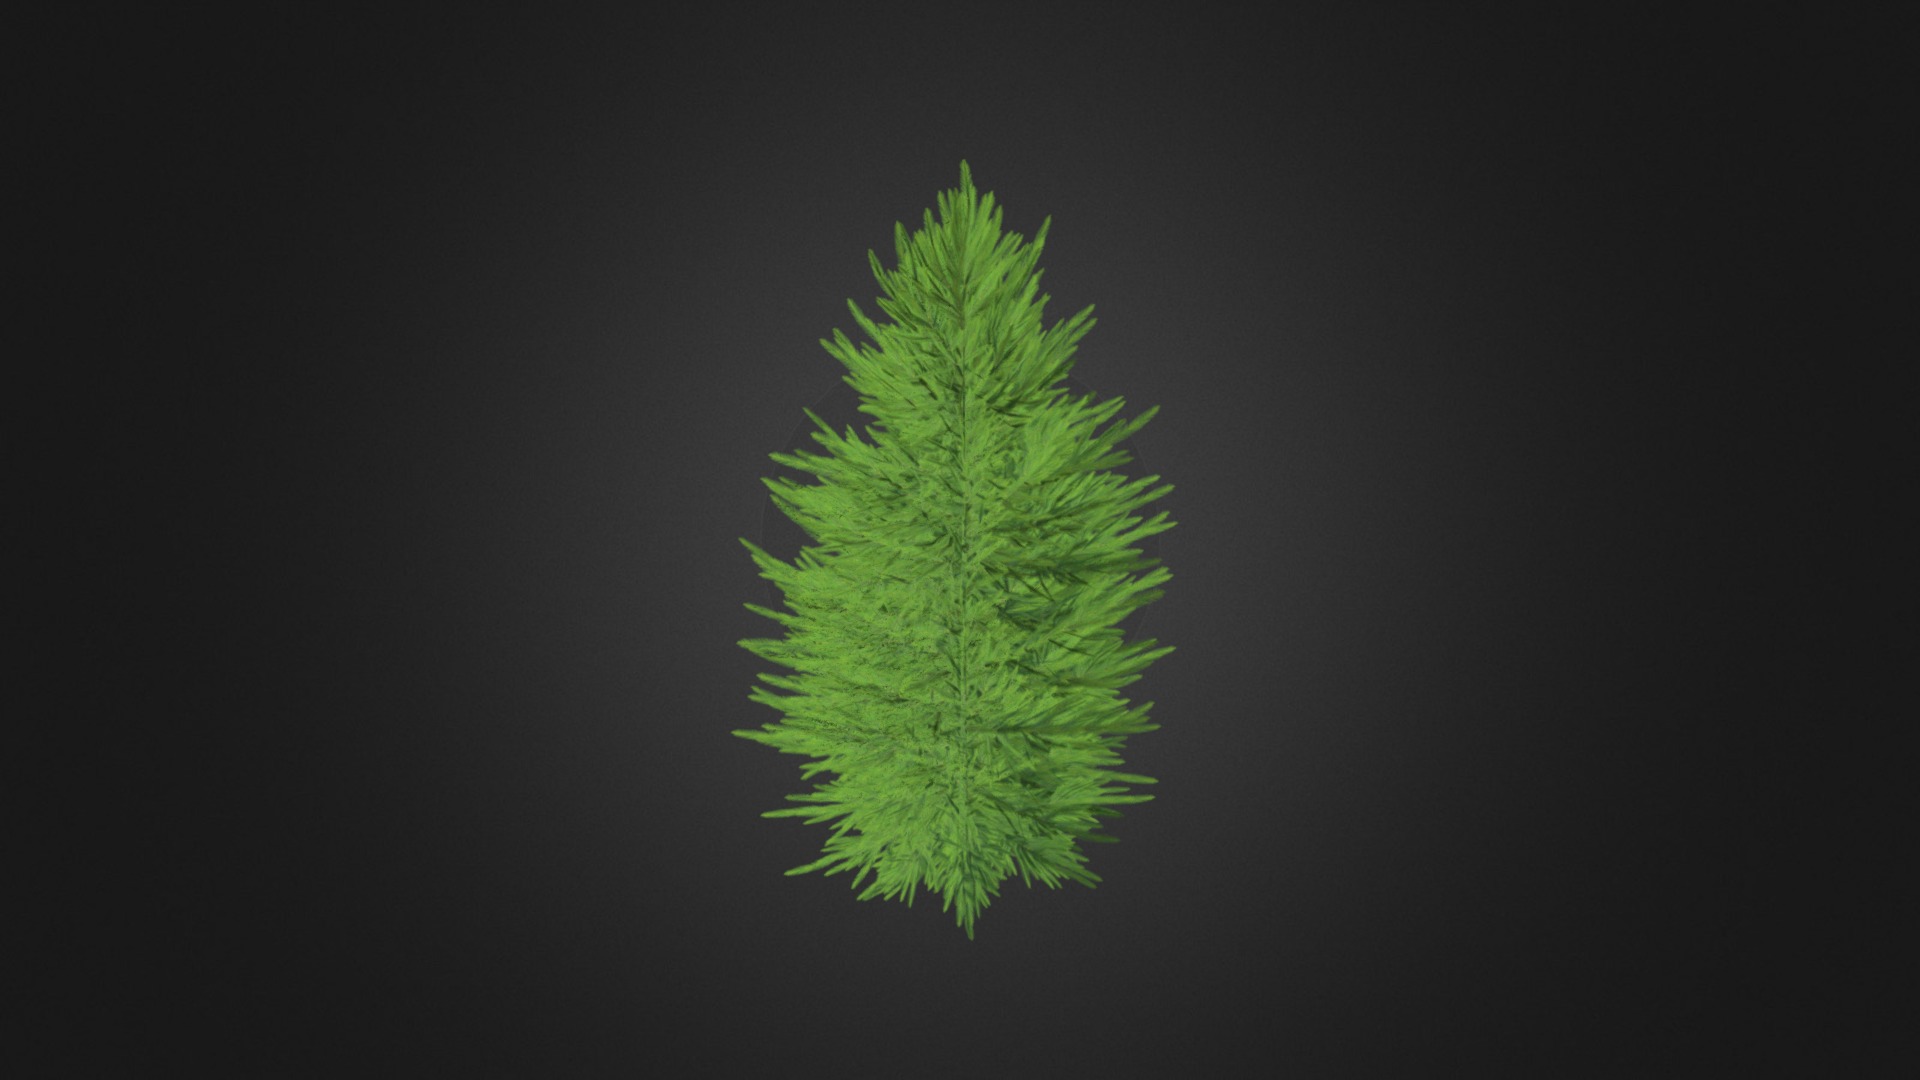 3D model Norway Spruce (Picea abies) 2.4m - This is a 3D model of the Norway Spruce (Picea abies) 2.4m. The 3D model is about a green leaf on a black background.